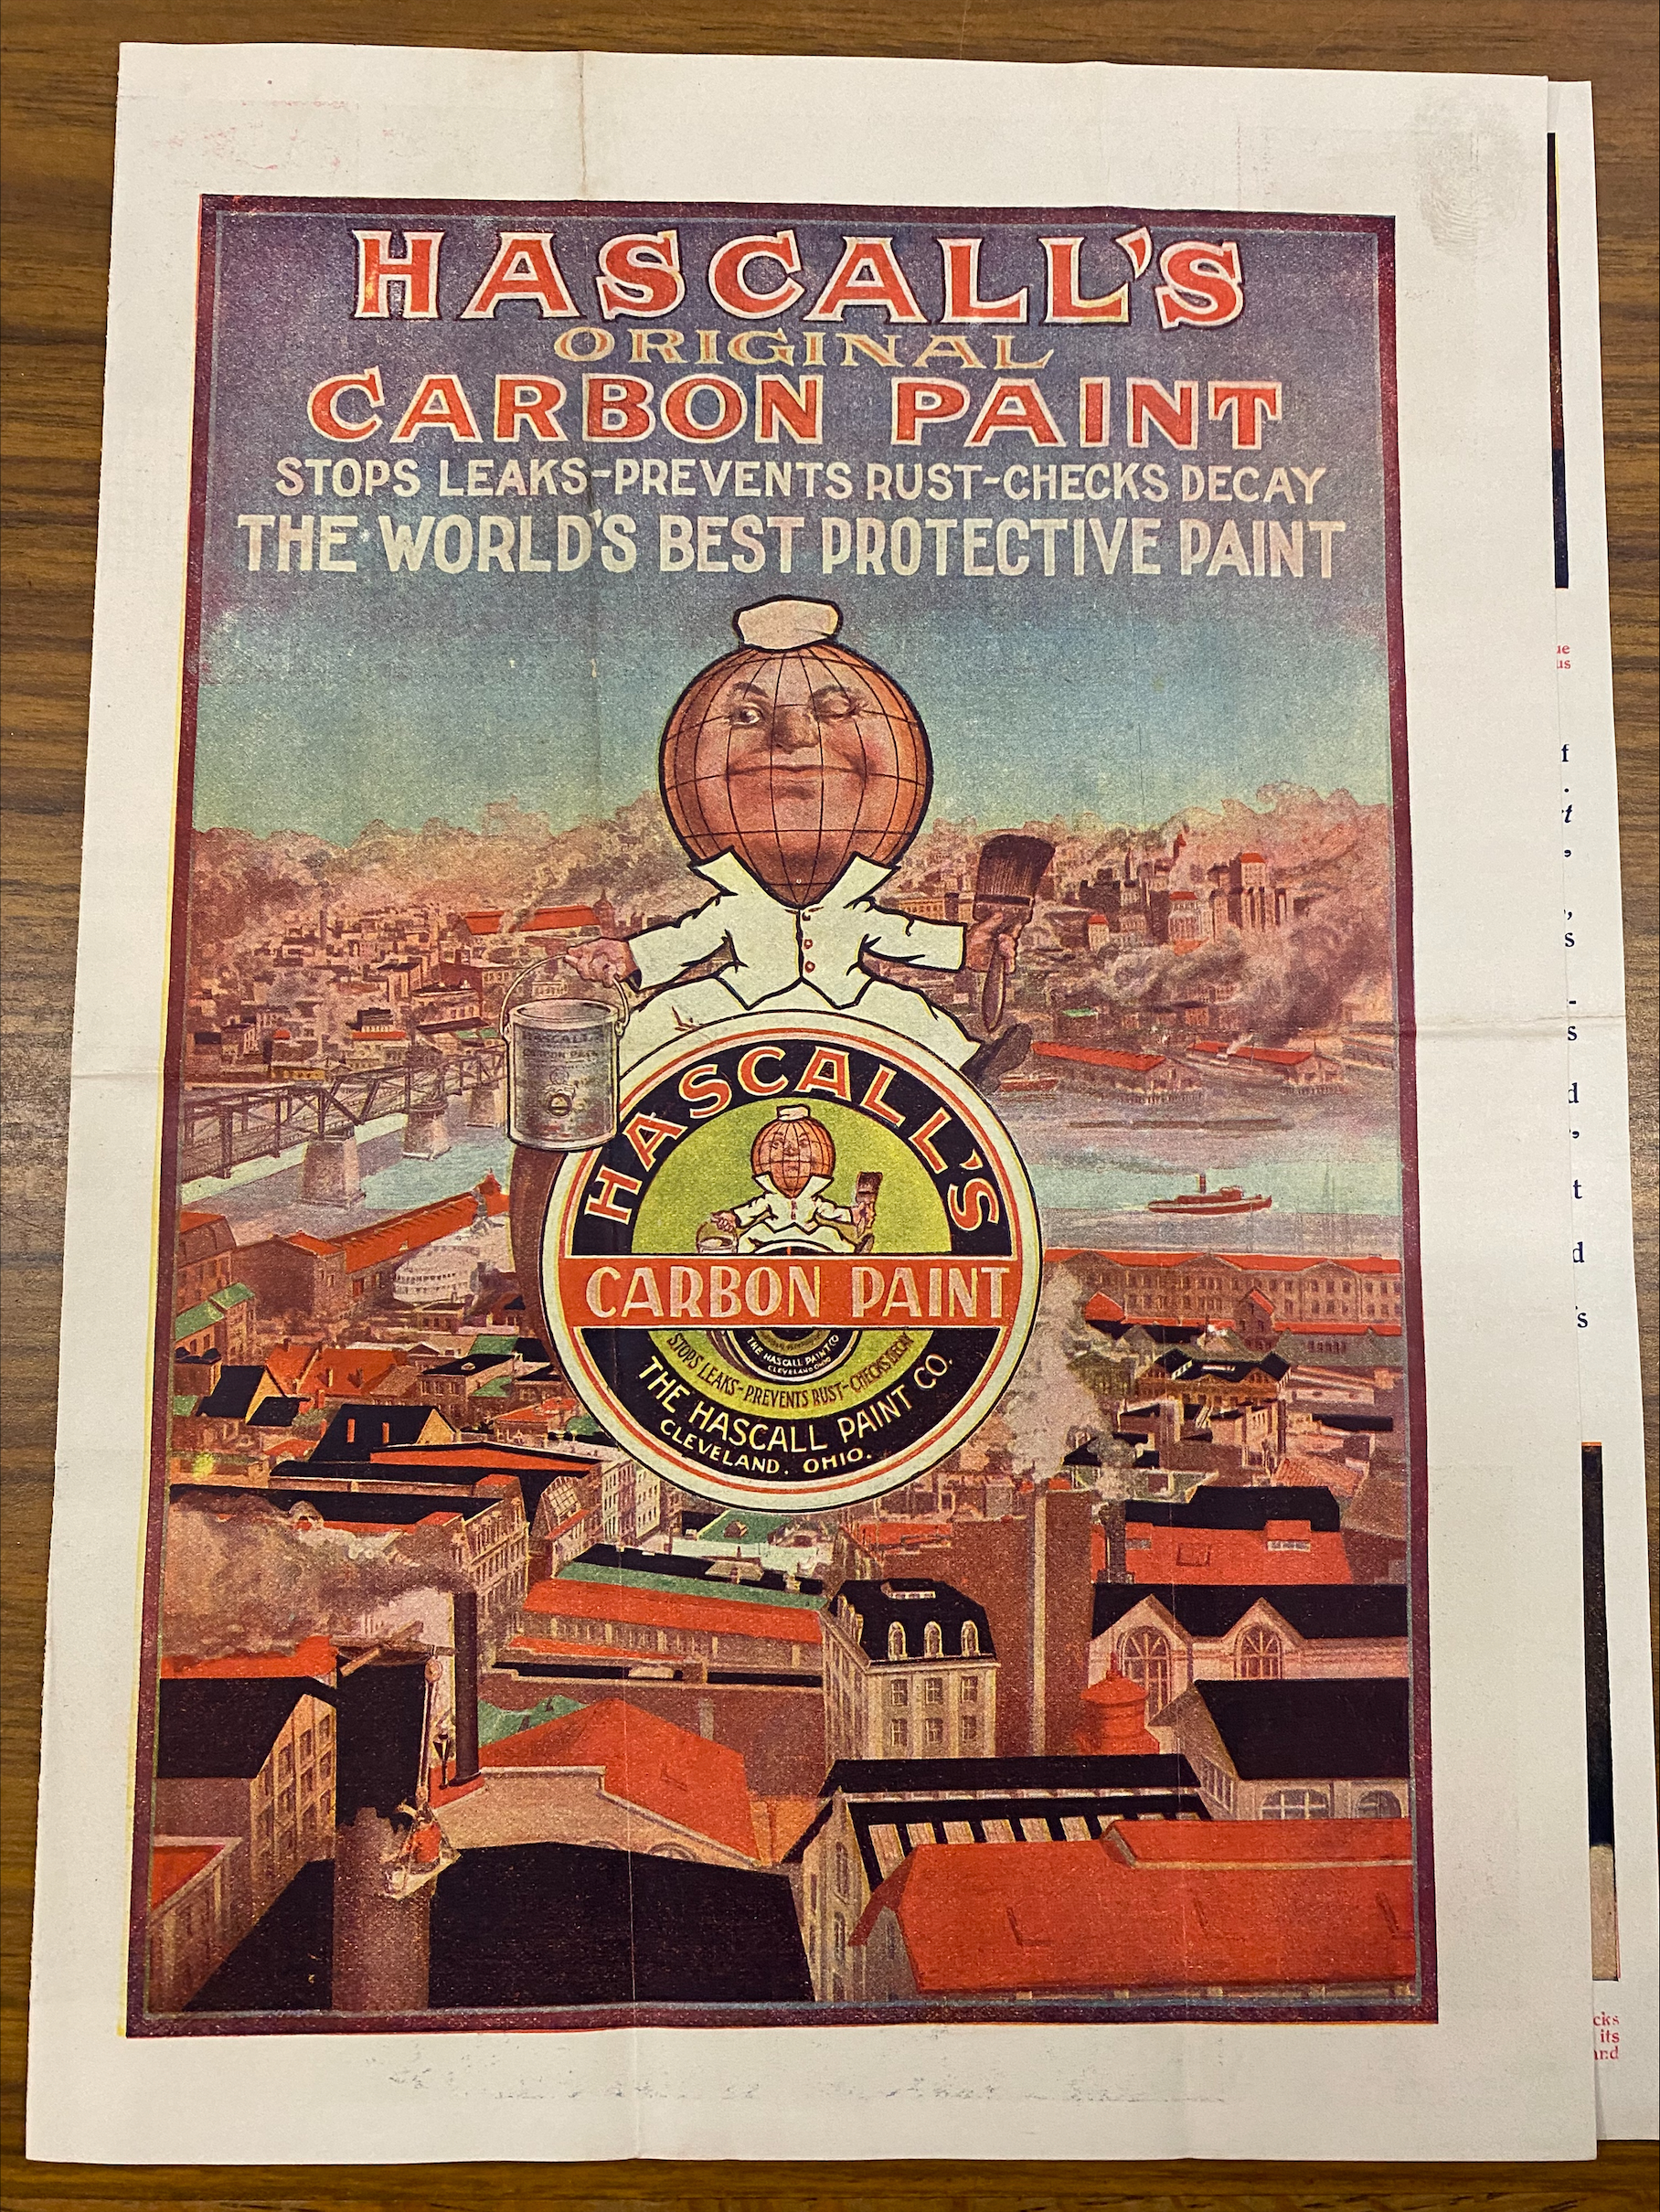 Early 1900s Ads from the Columbus and Hocking Coal and Iron Company Records